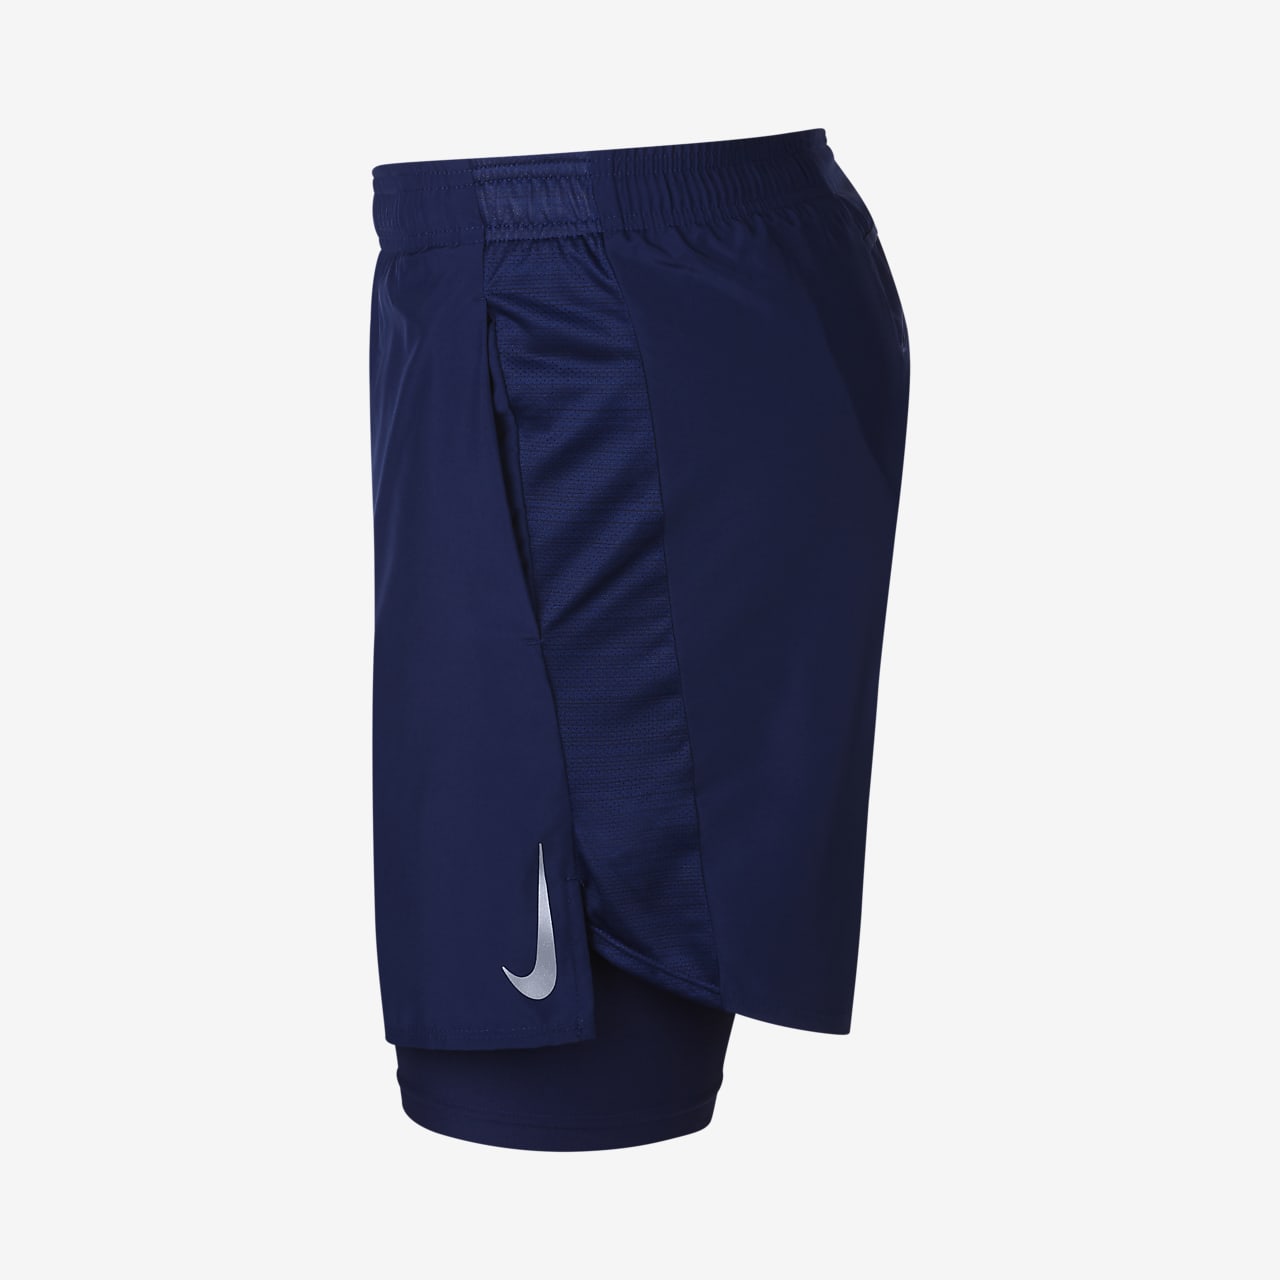 nike 7 challenger 2 in 1 shorts